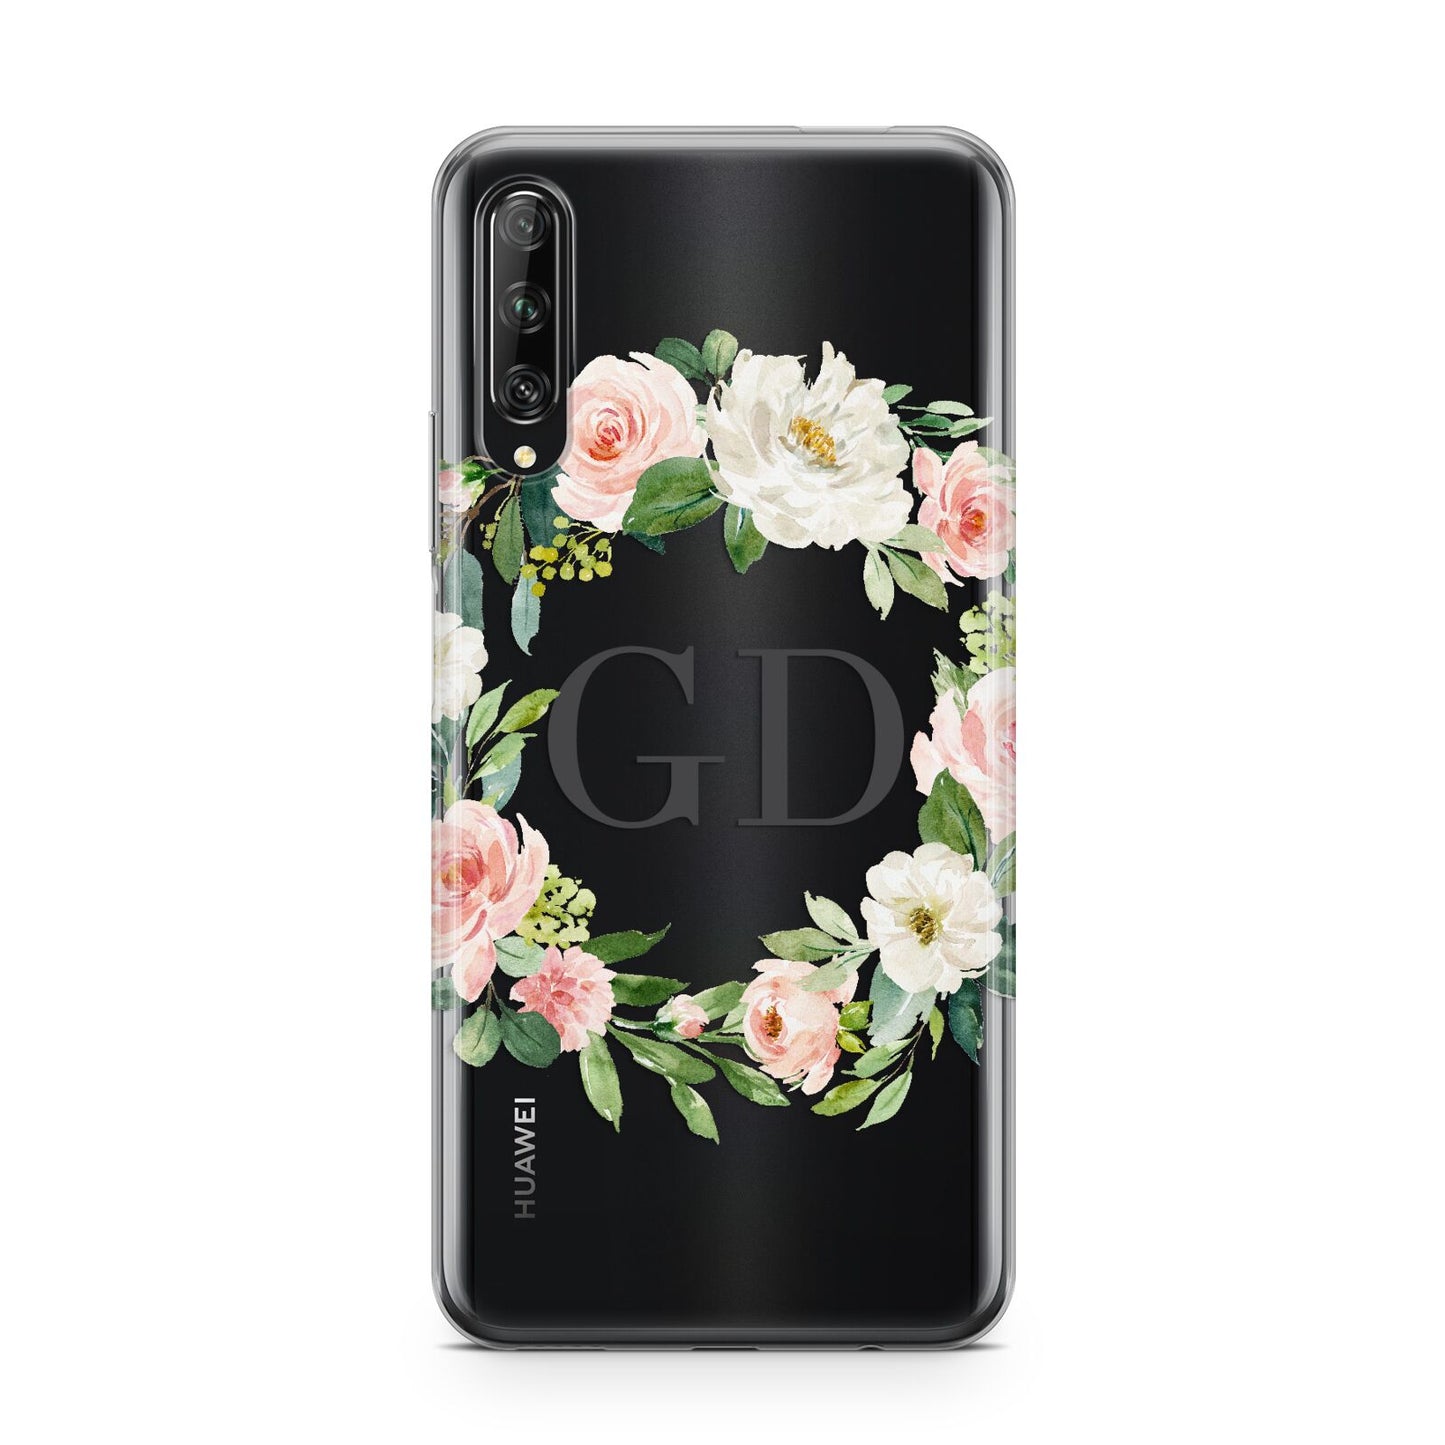 Personalised floral wreath Huawei P Smart Pro 2019